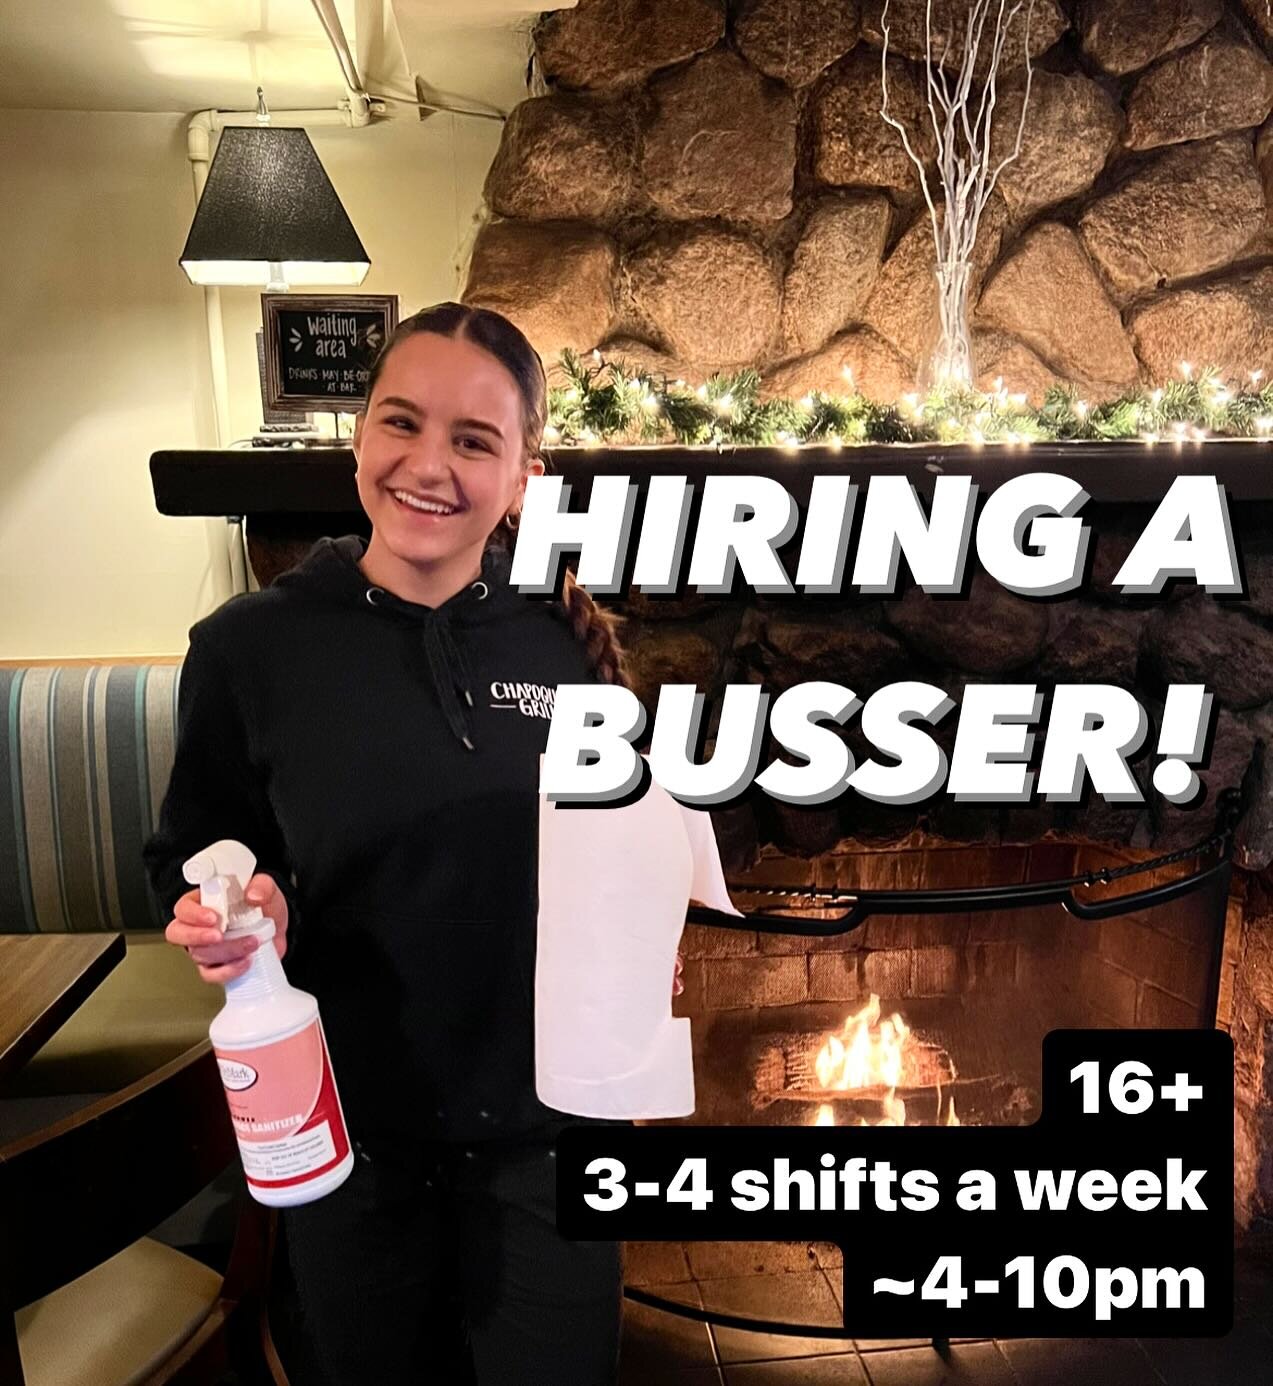 Looking for a busser! Shift is approximately 4-10, so must be 16+ to stay that late. 3-4 shifts a week. Must be available Tuesday-Saturday. Email chapoquoitgrill@gmail.com or private message with interest! Tell your friends! 📢